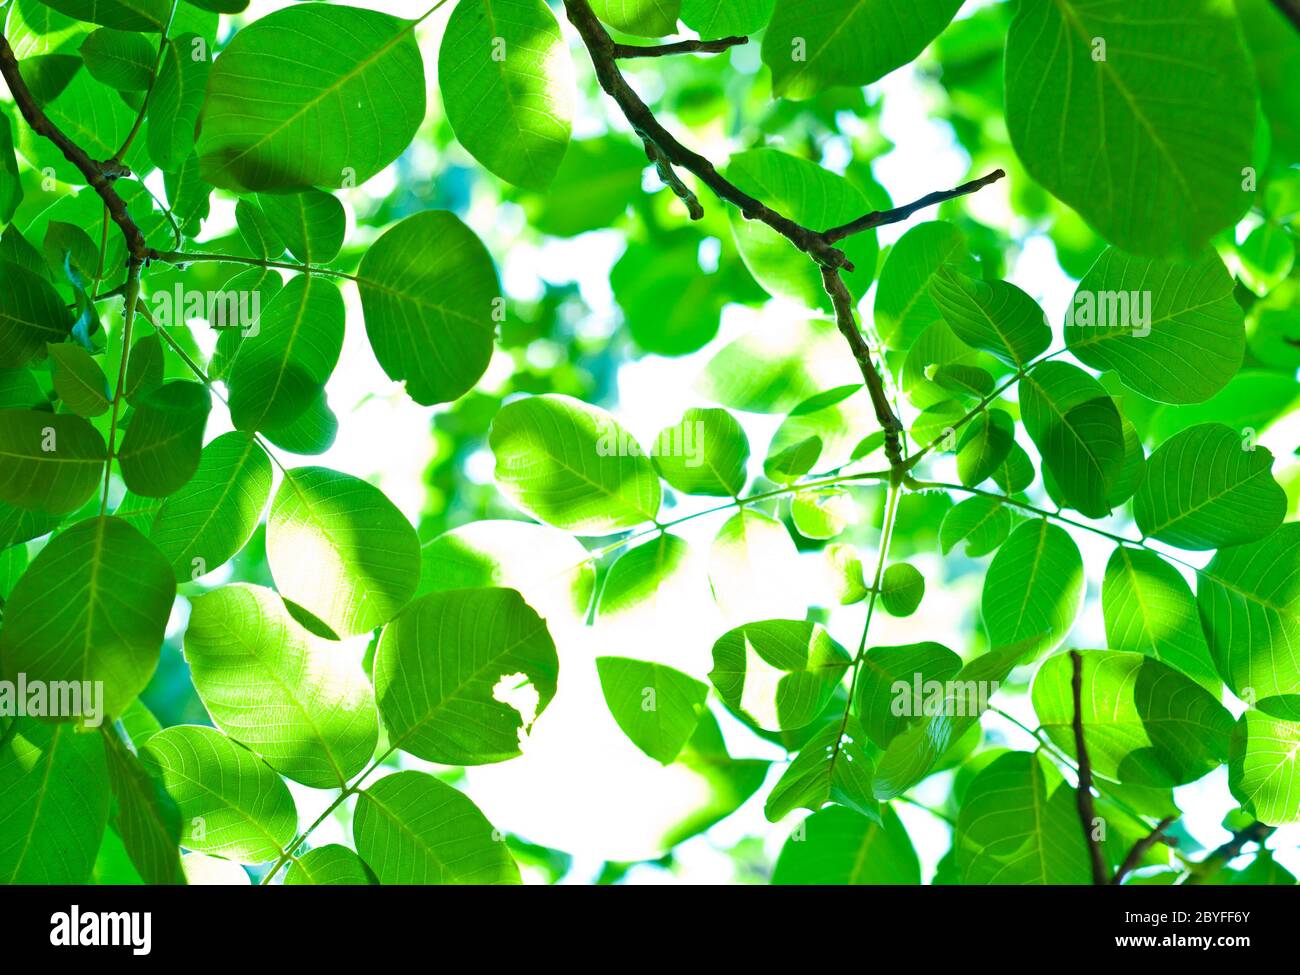 Fresh green leafs with blurs Stock Photo